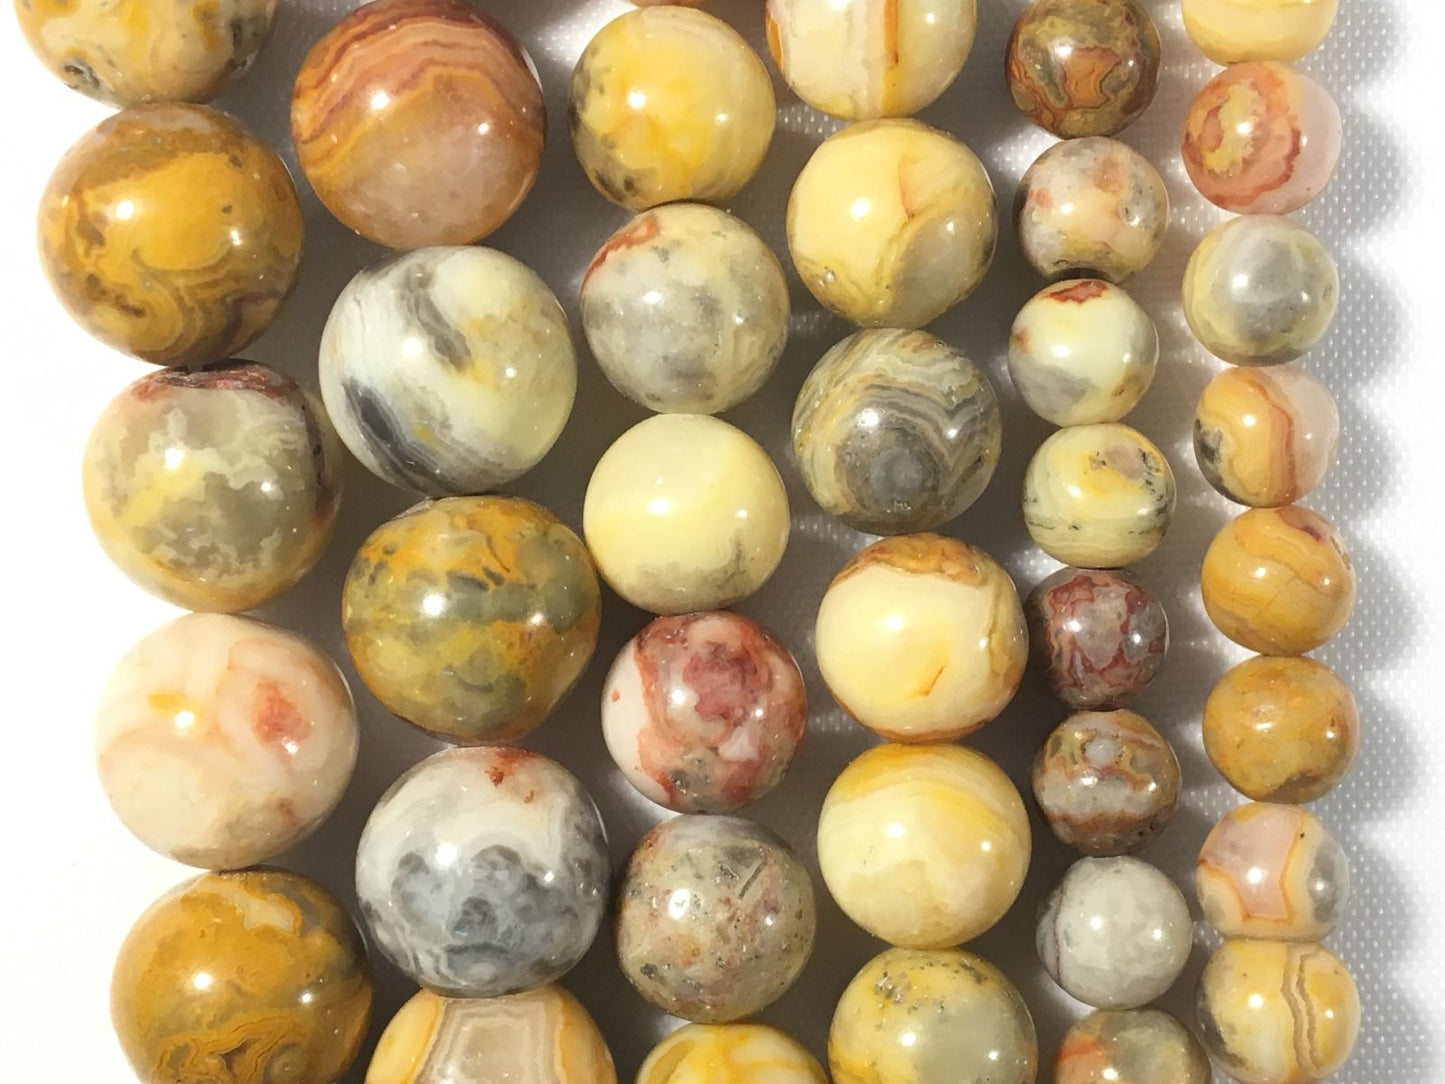 Natural Crazy Lace Agate Beads